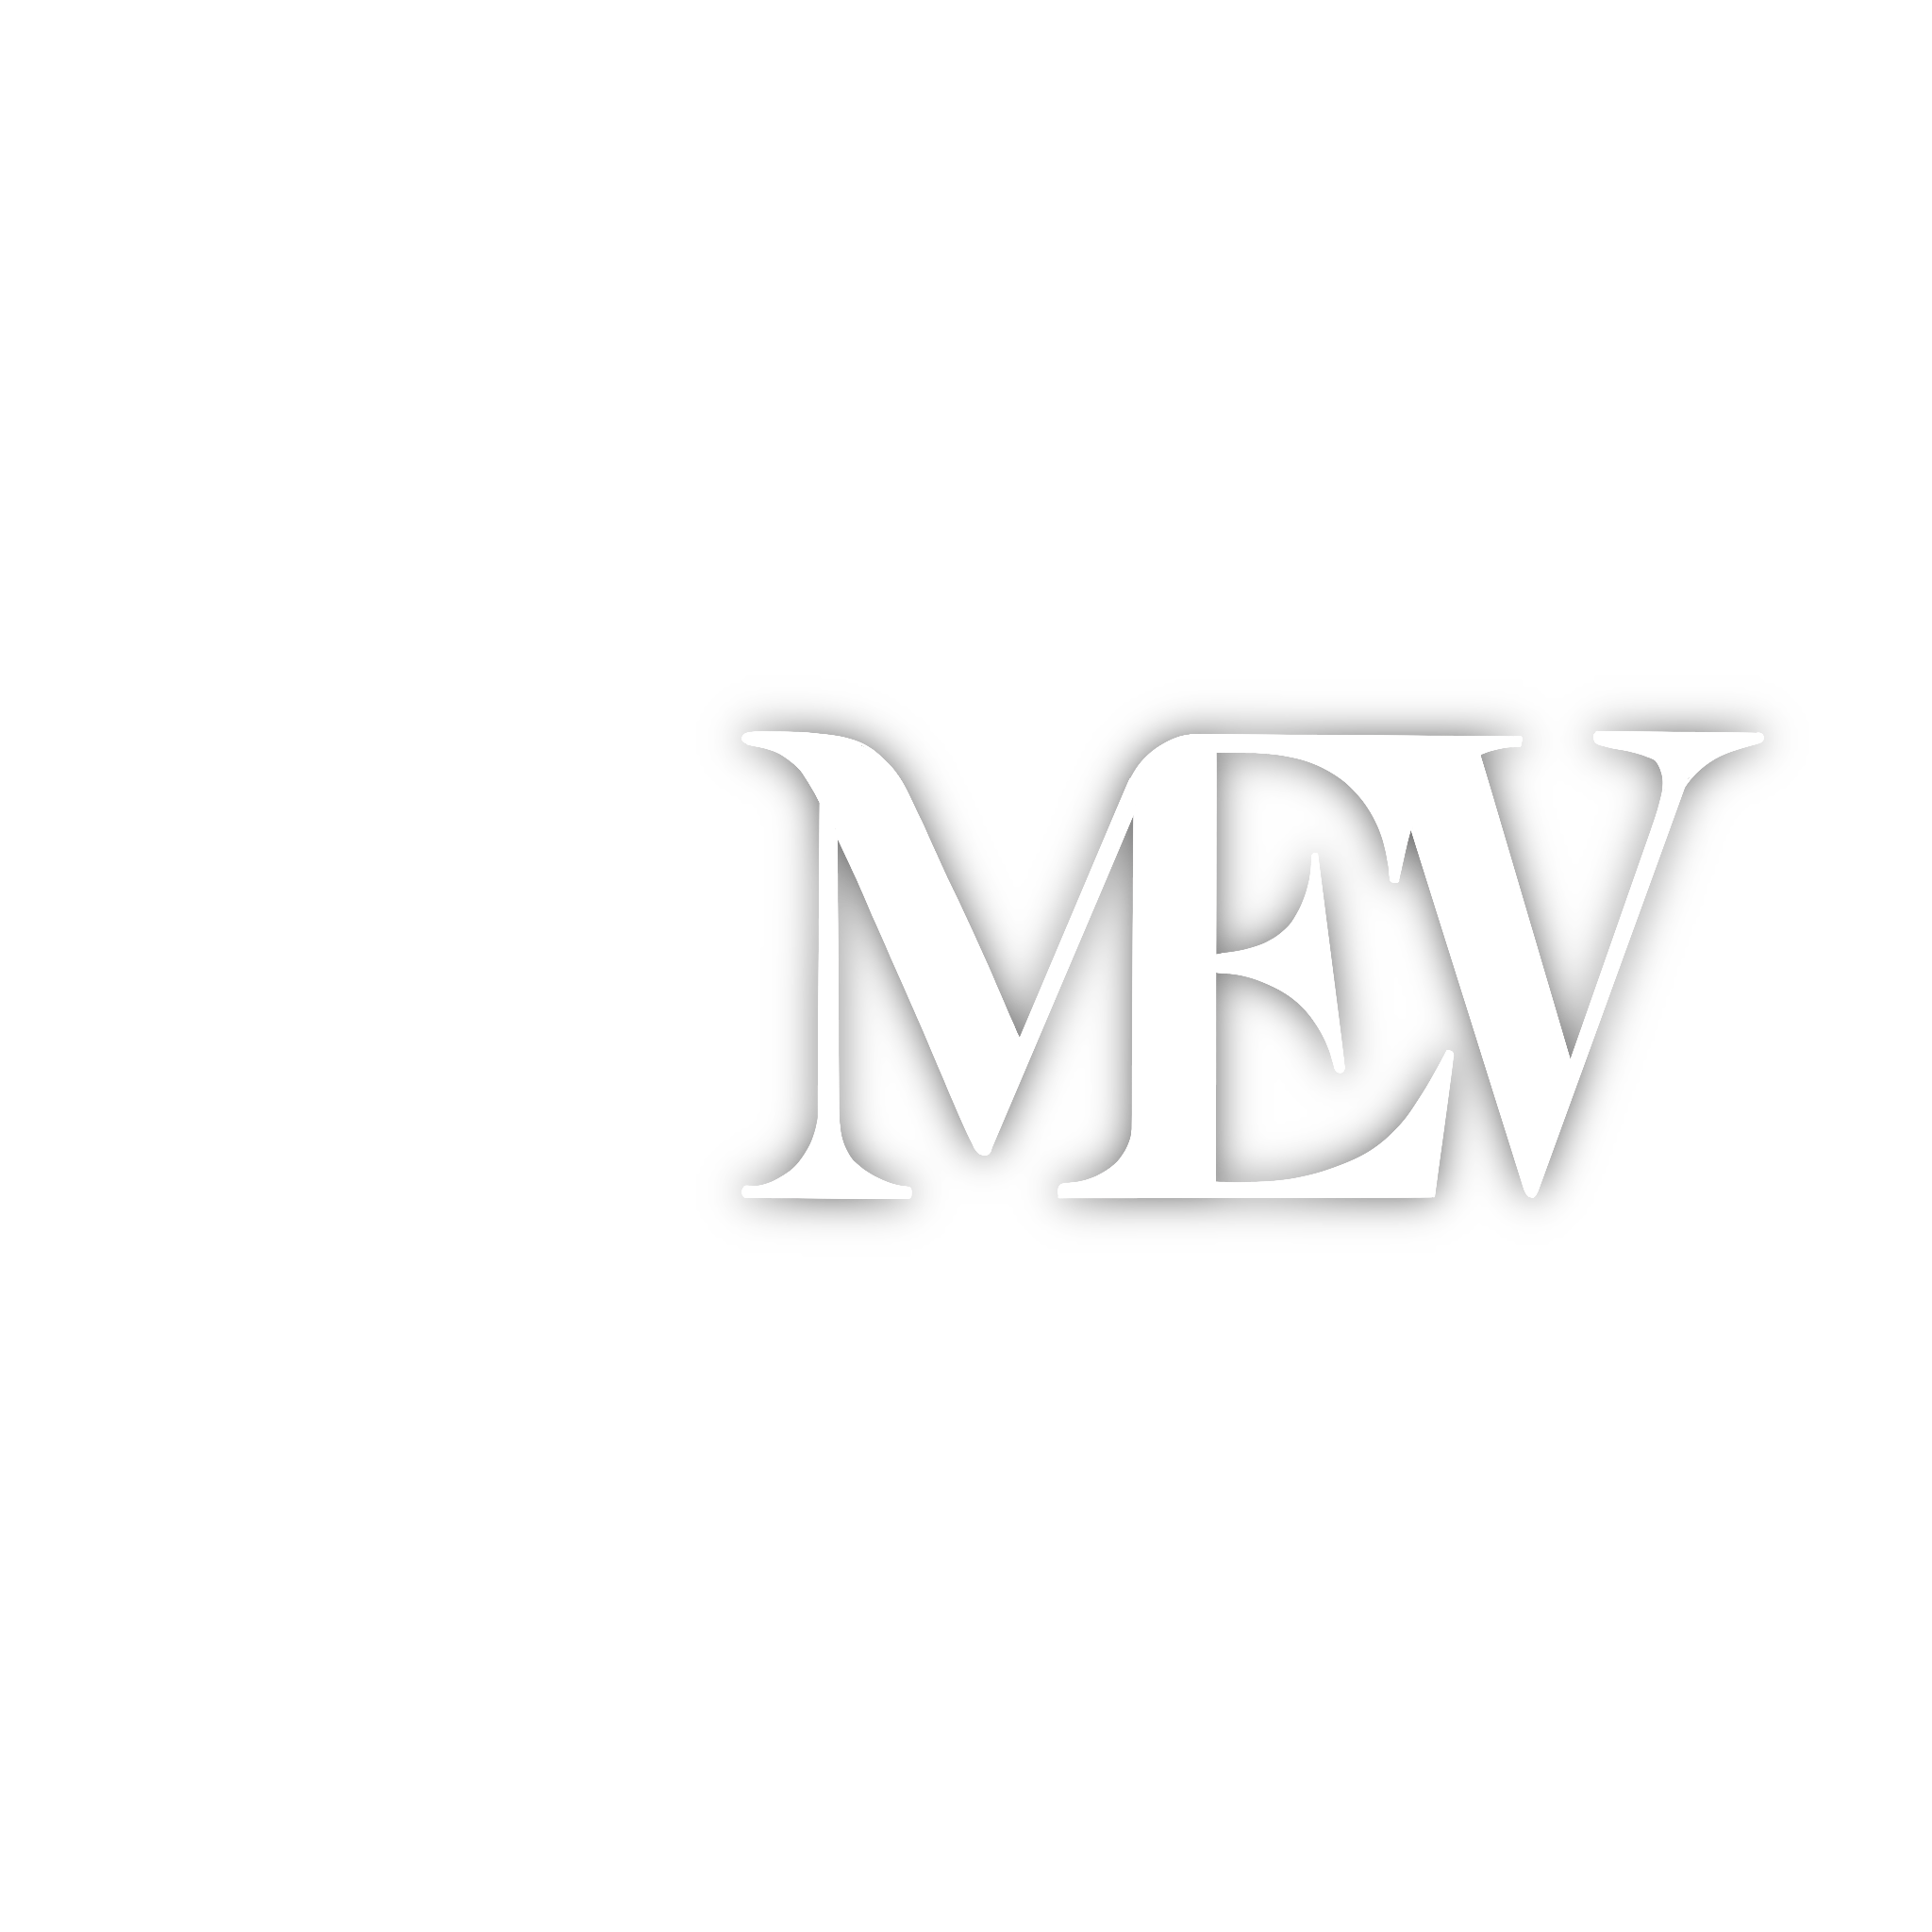 Middle East Voice